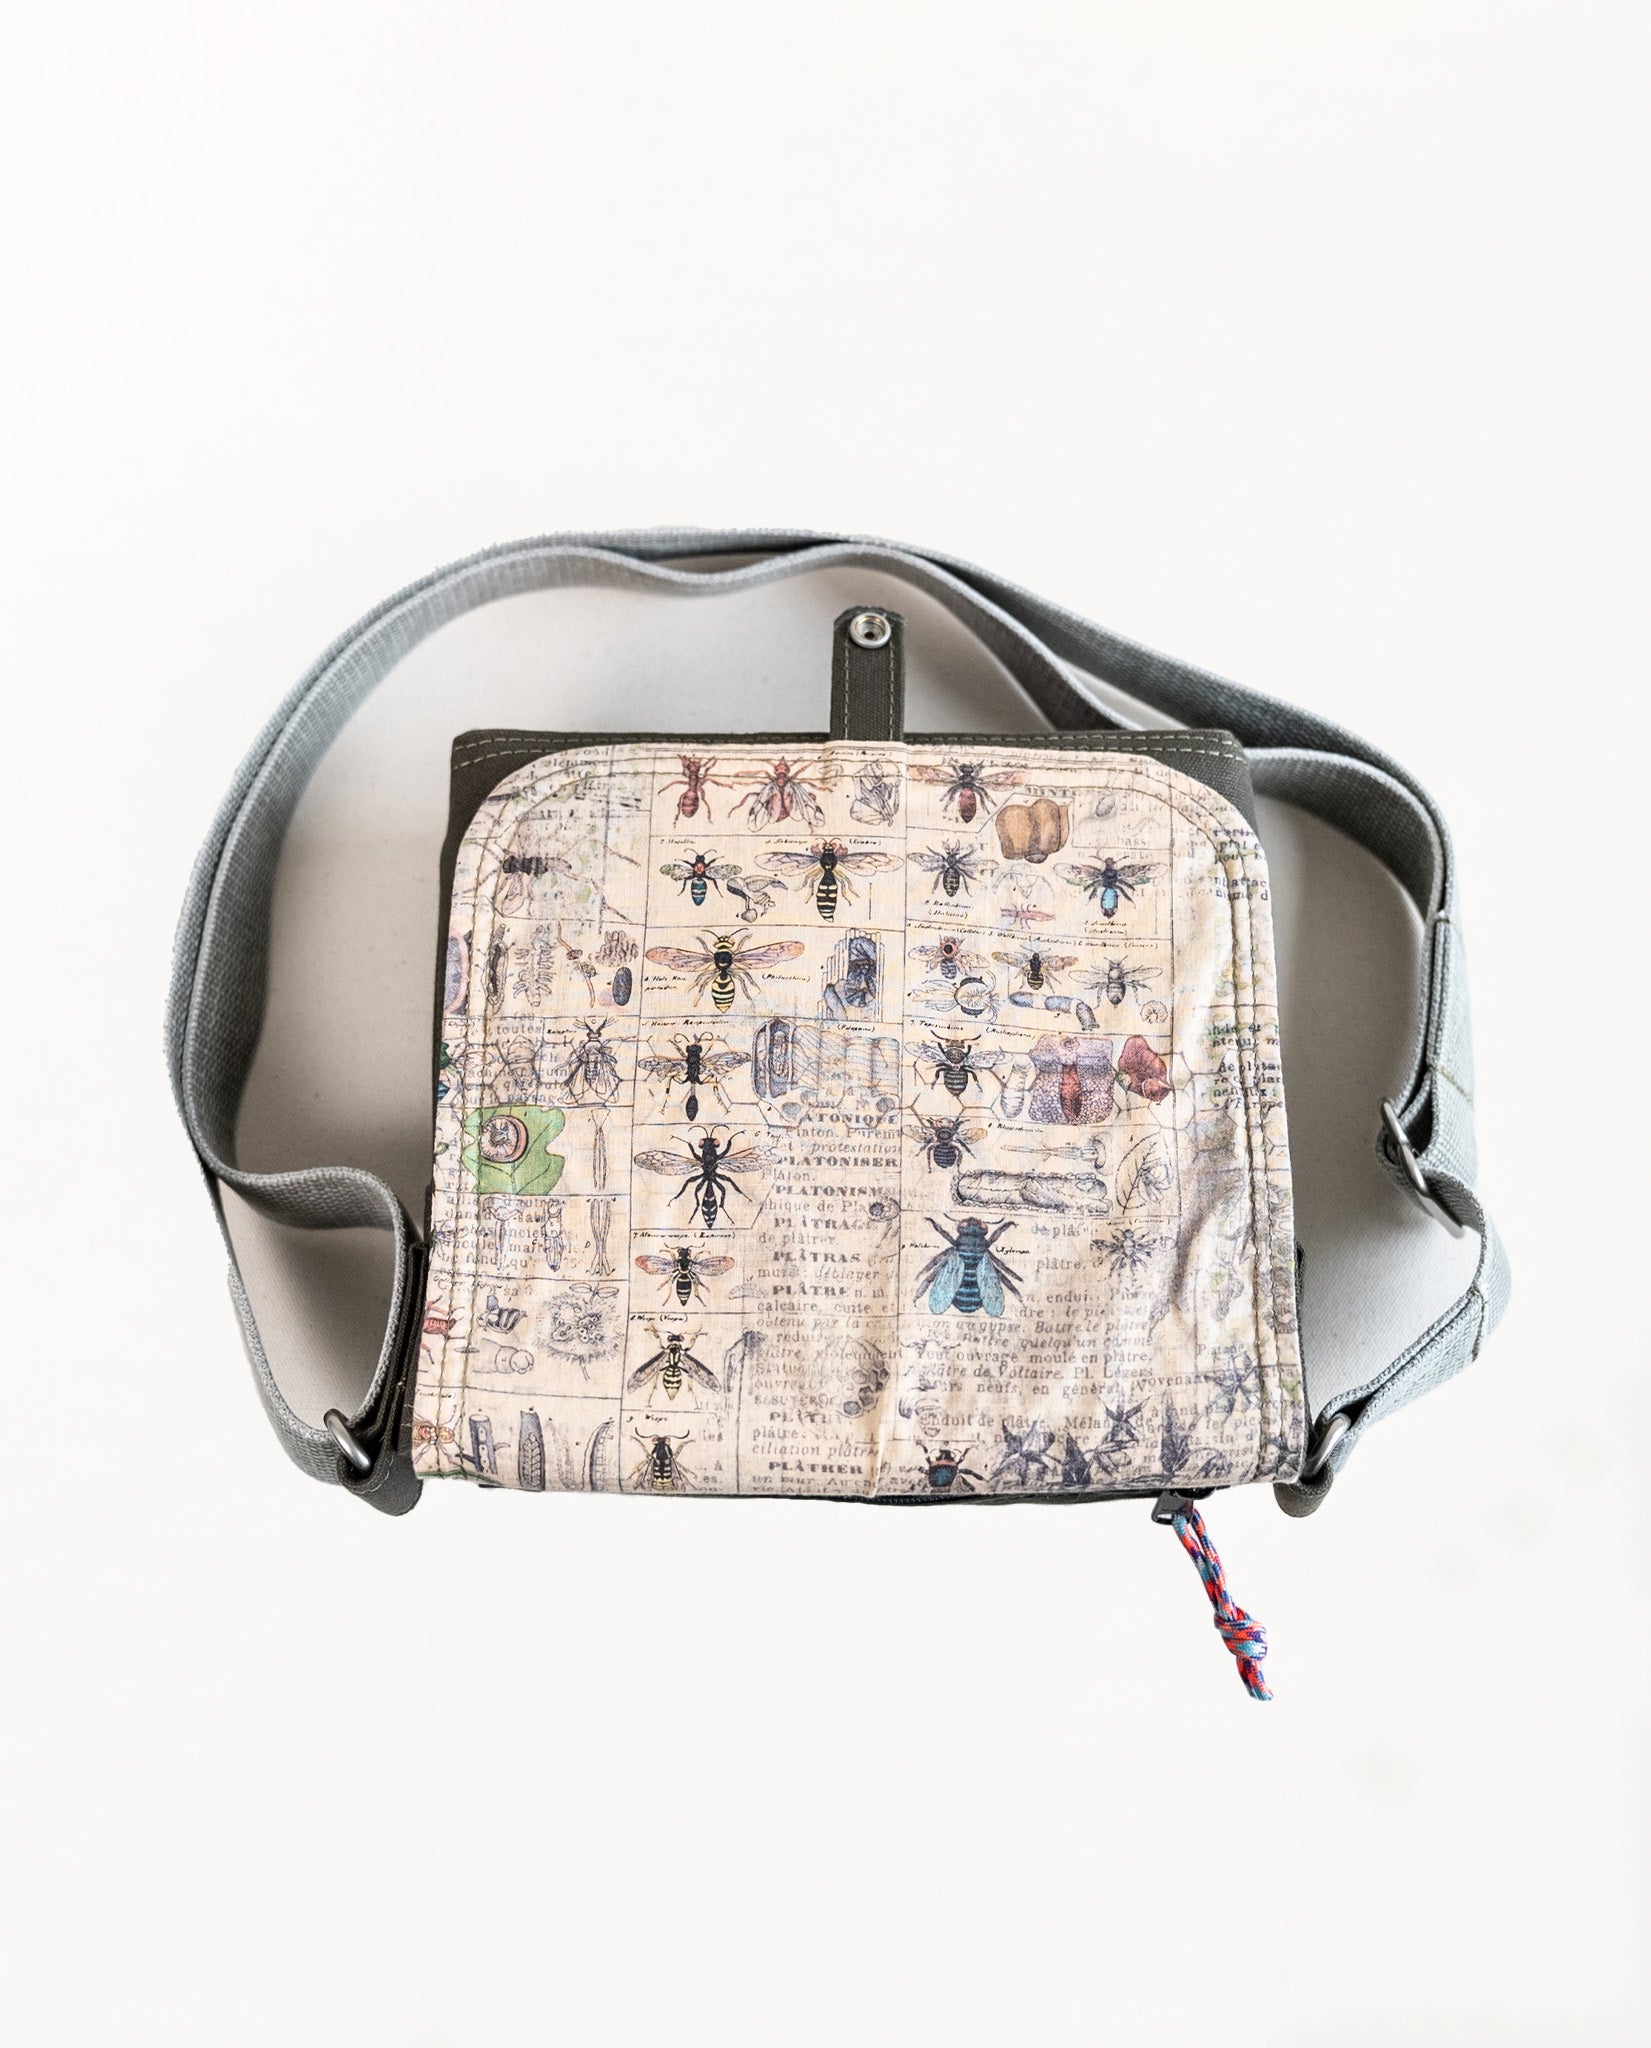 Inside of flap showing entomology print lining fabric of Dock 5’s Chickadee Canvas Mini Messenger Bag in olive featuring art from owner Natalija Walbridge